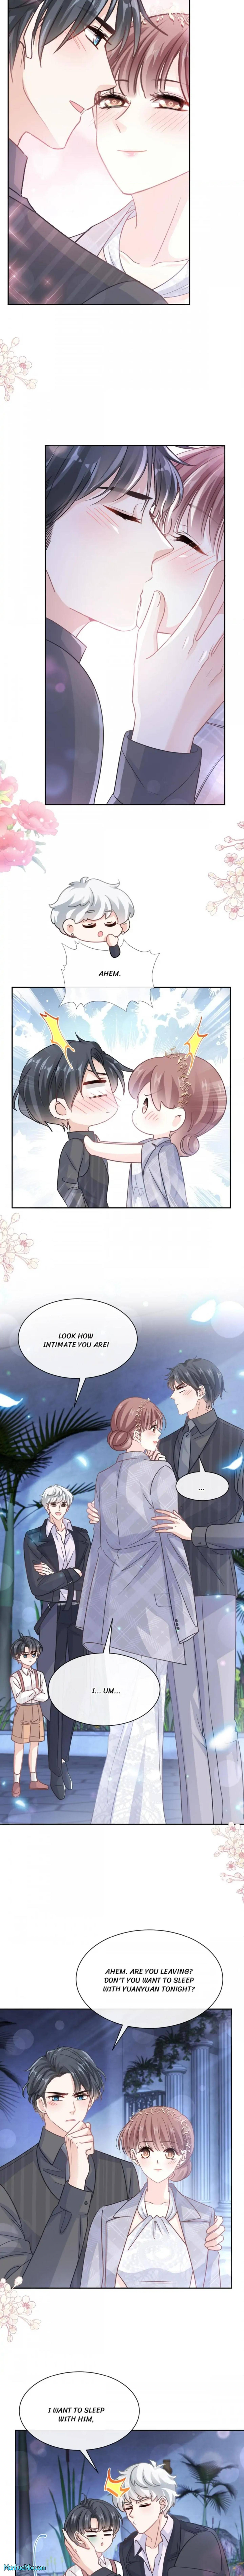 Love Me Gently, Bossy Ceo - chapter 338 - #2